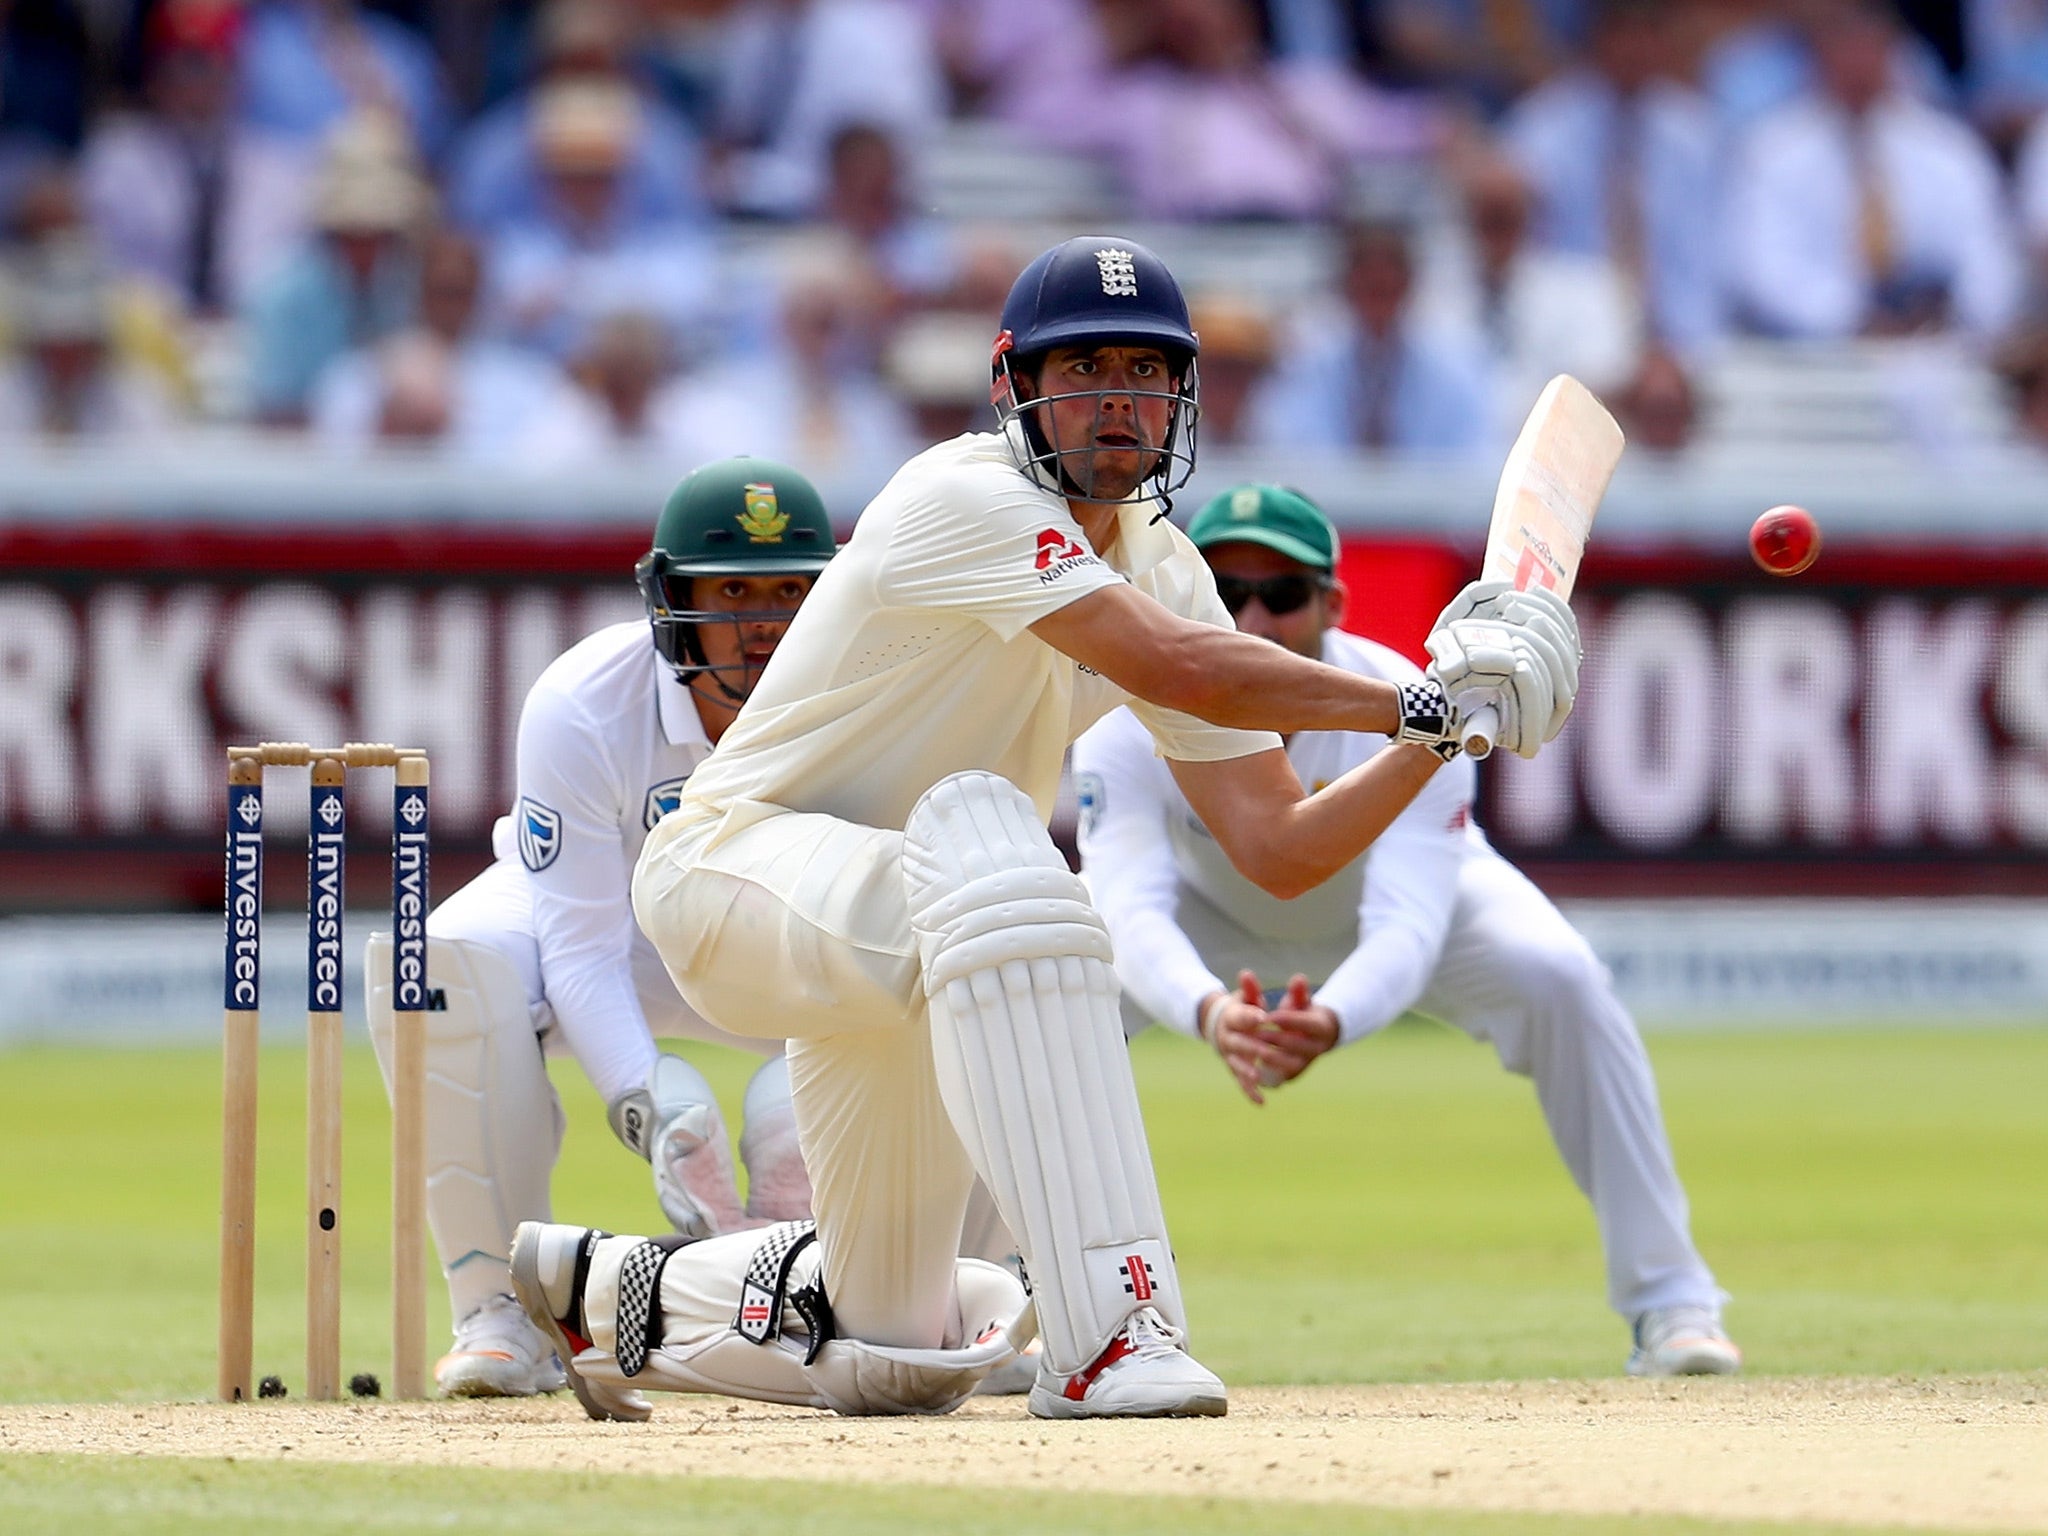 Alastair Cook's painstaking 127-ball half-century strengthened England's hand